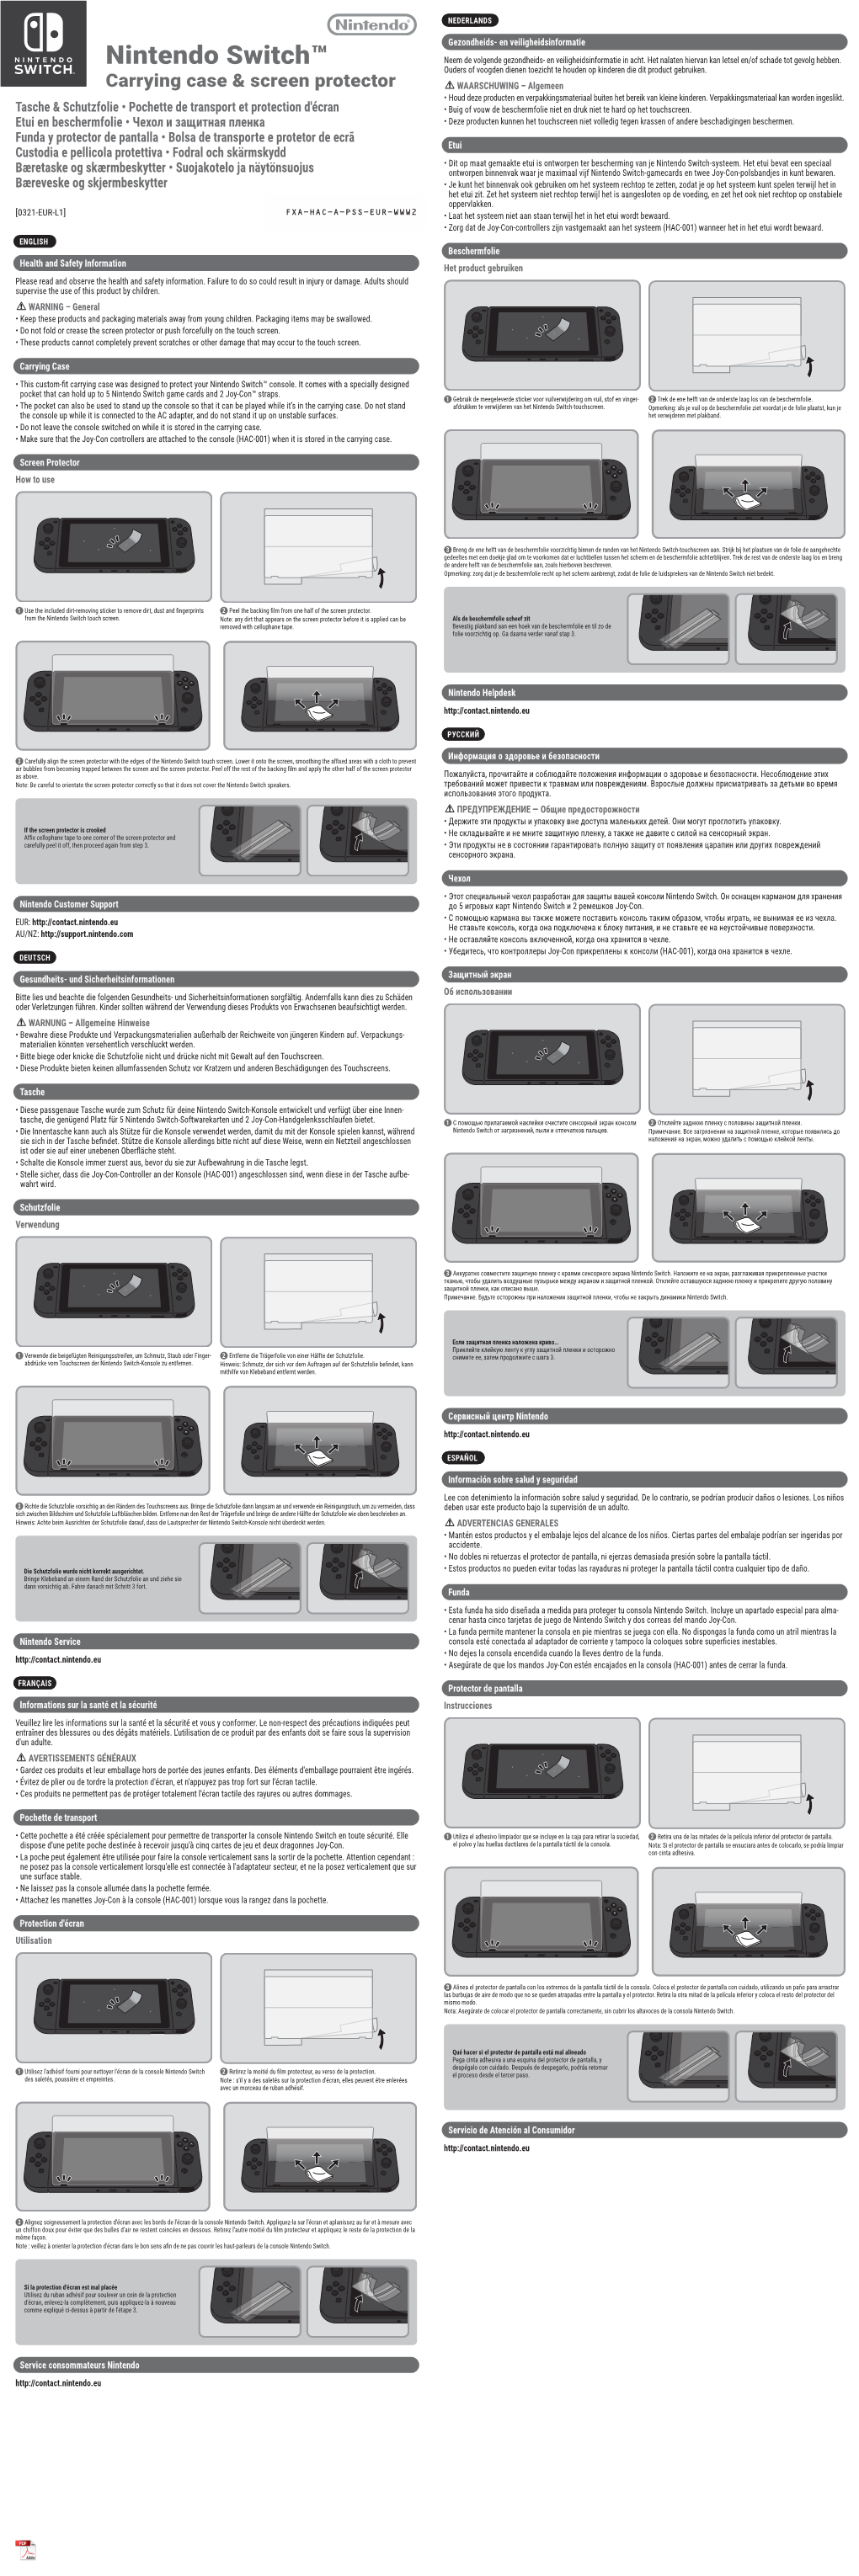 NINTENDO Carrying Case and Screen Protector User Manual